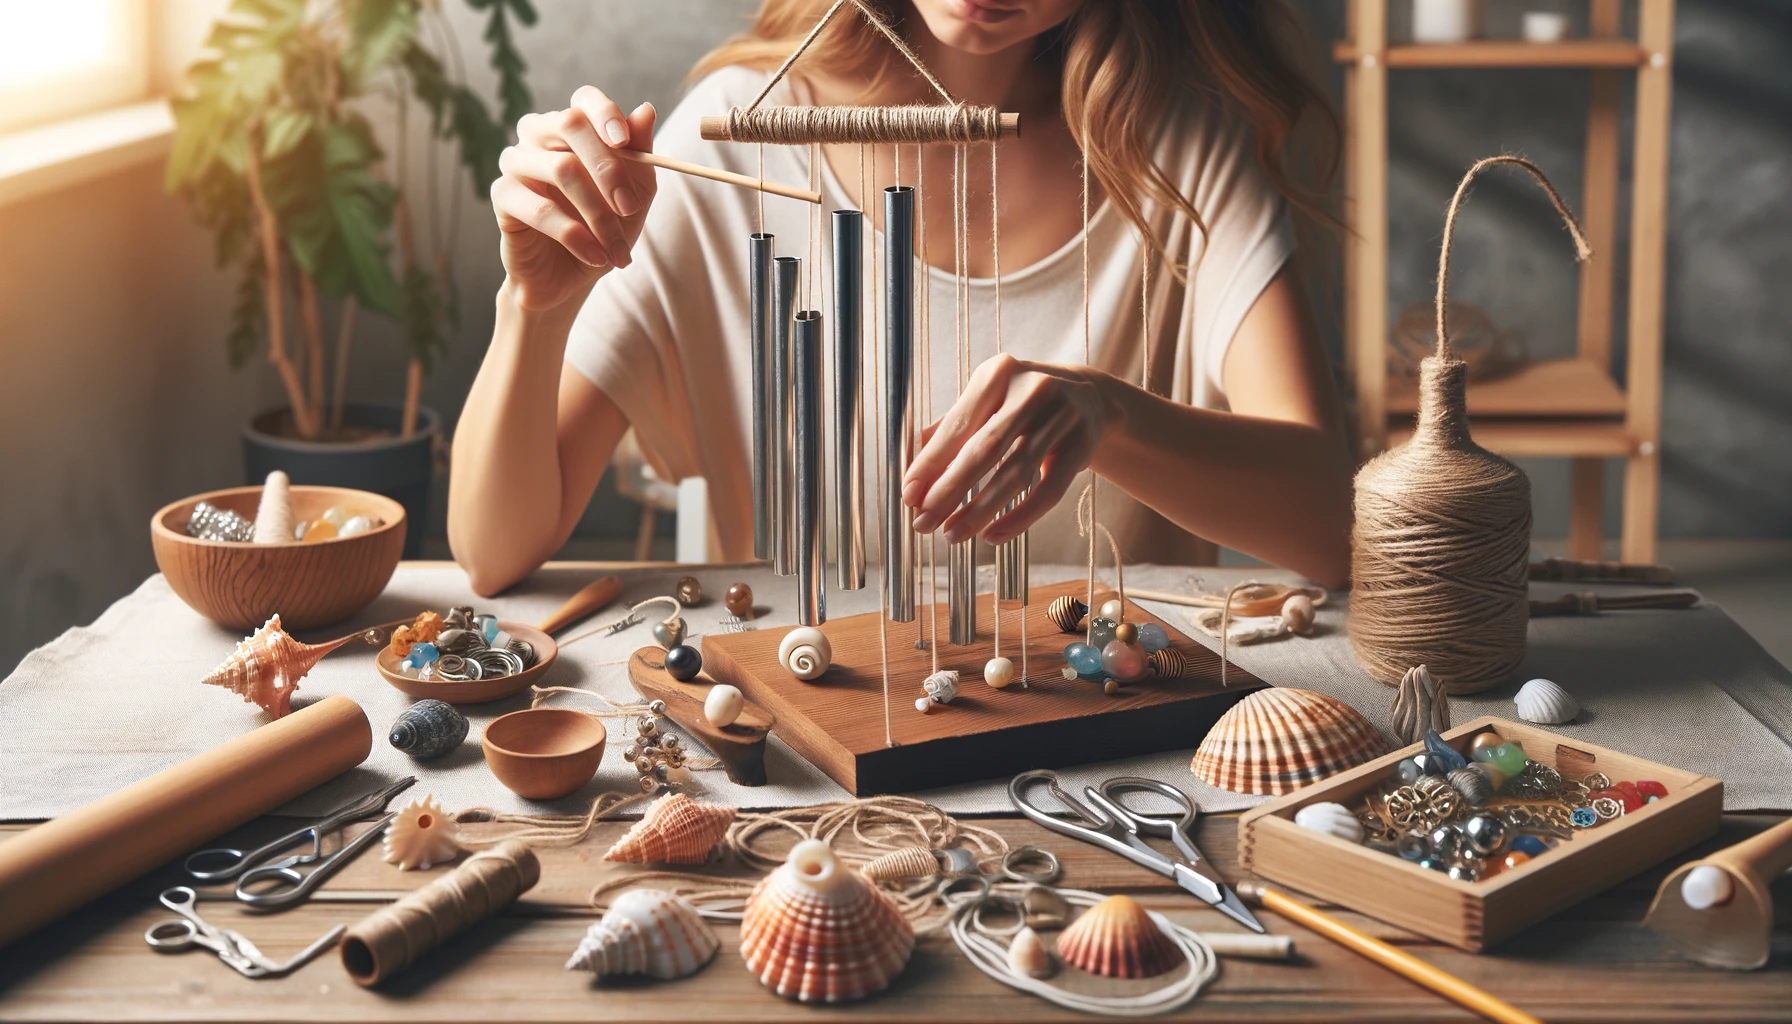 A woman crafting a wind chime, working on a table with materials like metal tubes, shells, beads, keys, and a wooden base